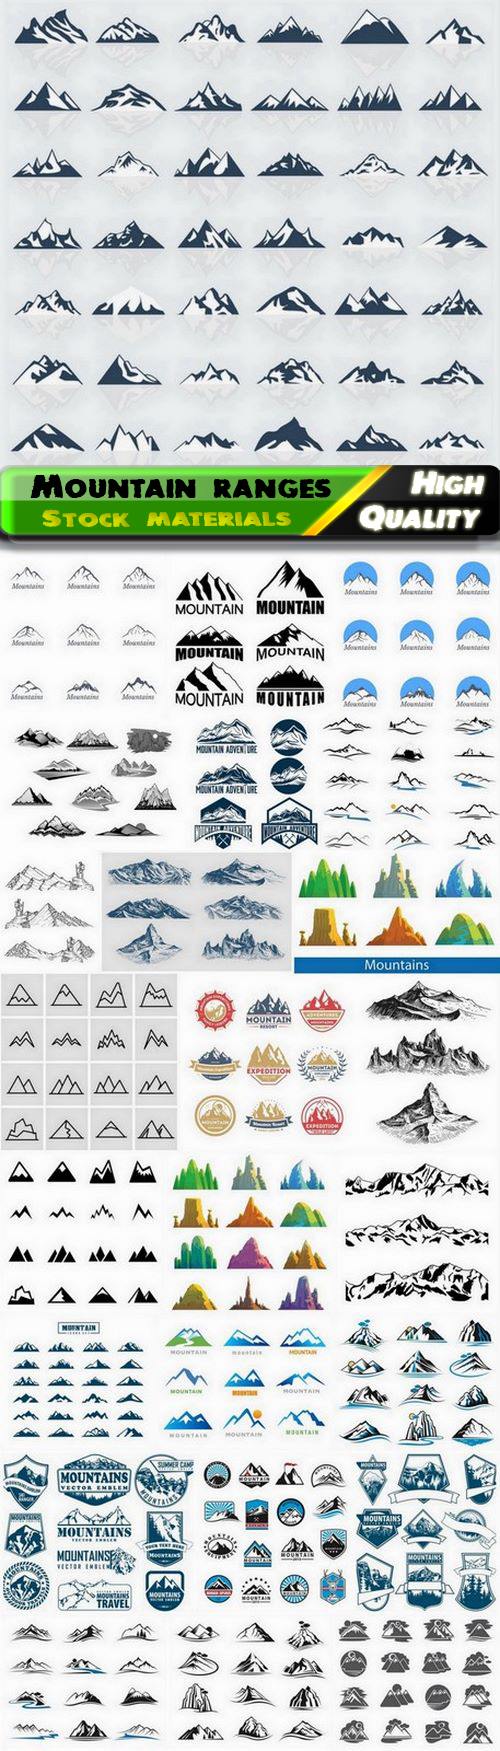 Mountain ranges and rock icon and landscape illustration 25 Eps